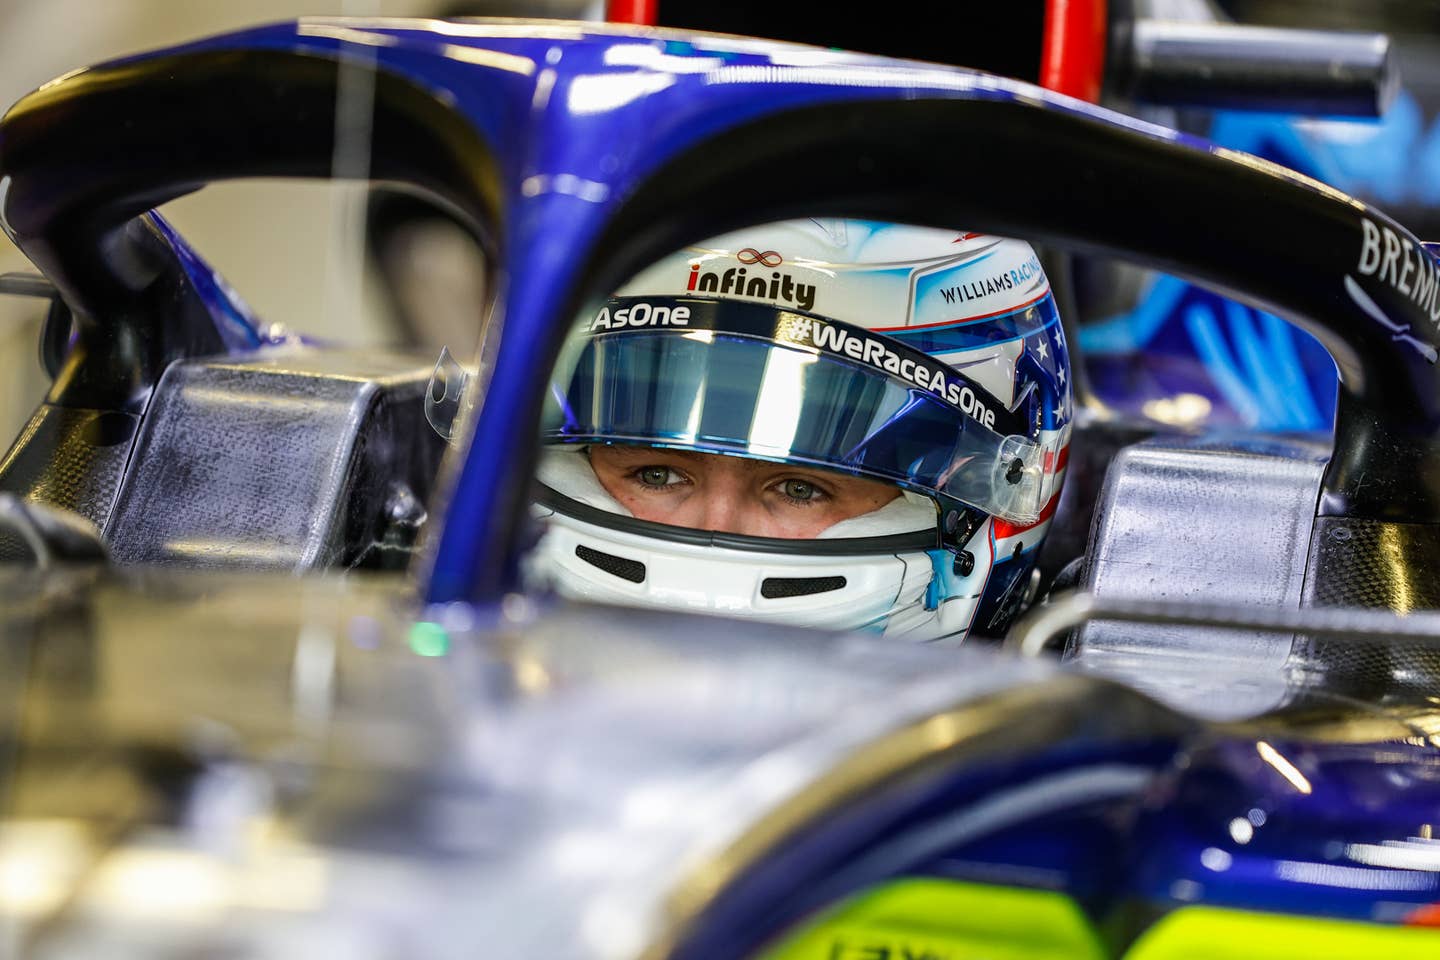 Logan Sargeant practicing for Williams during the Mexico grand prix weekend. Photo | Gongora/NurPhoto via Getty Images)